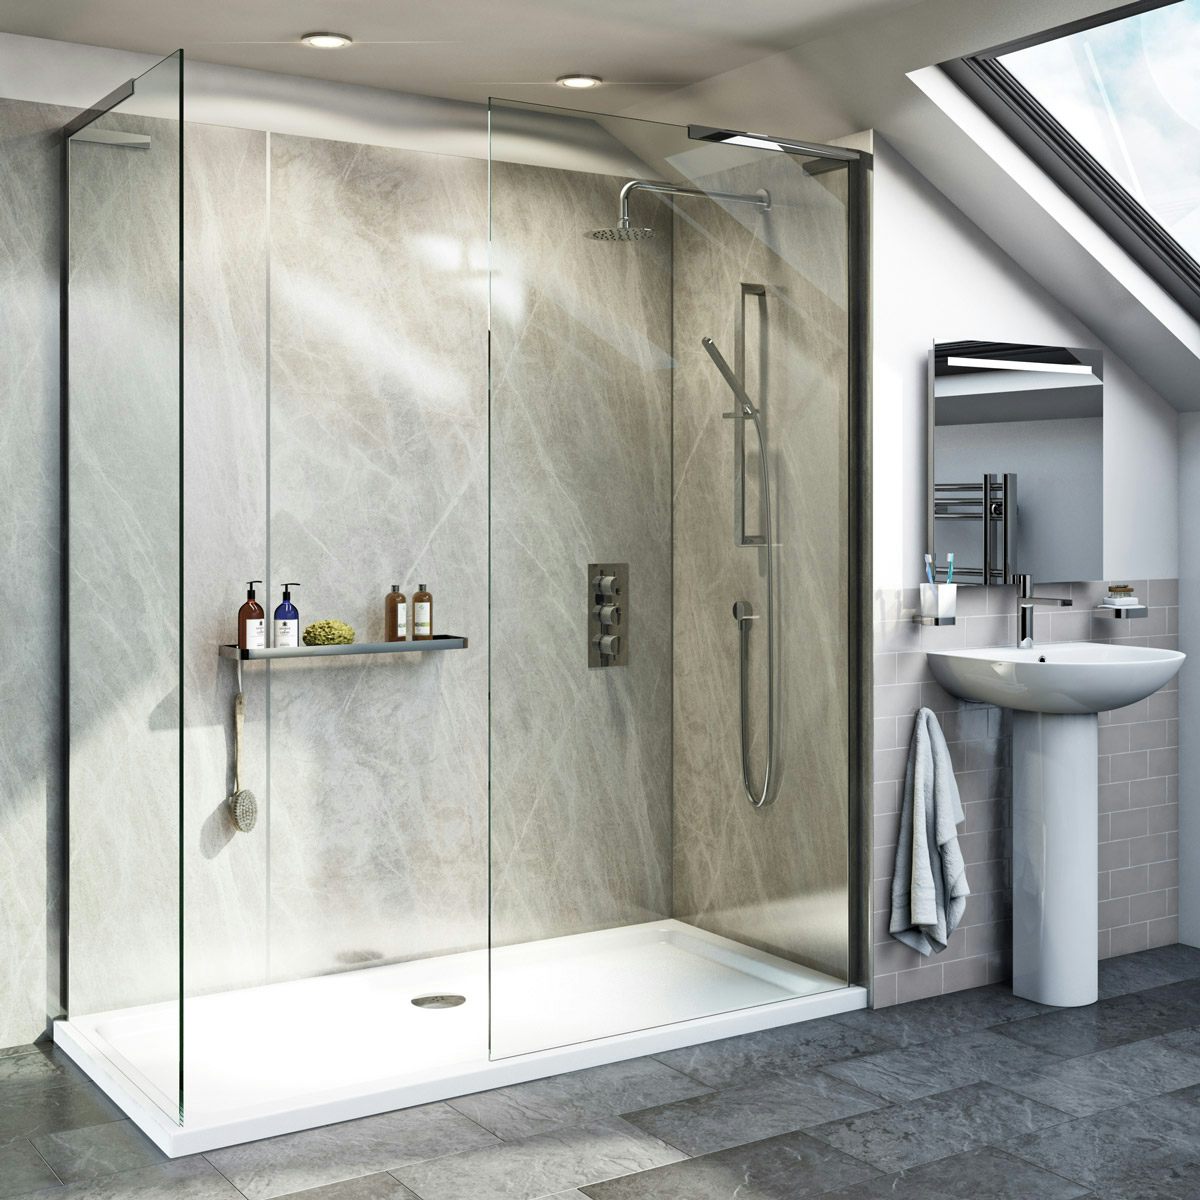 Mode 5mm walk in shower enclosure with stone gloss shower tray